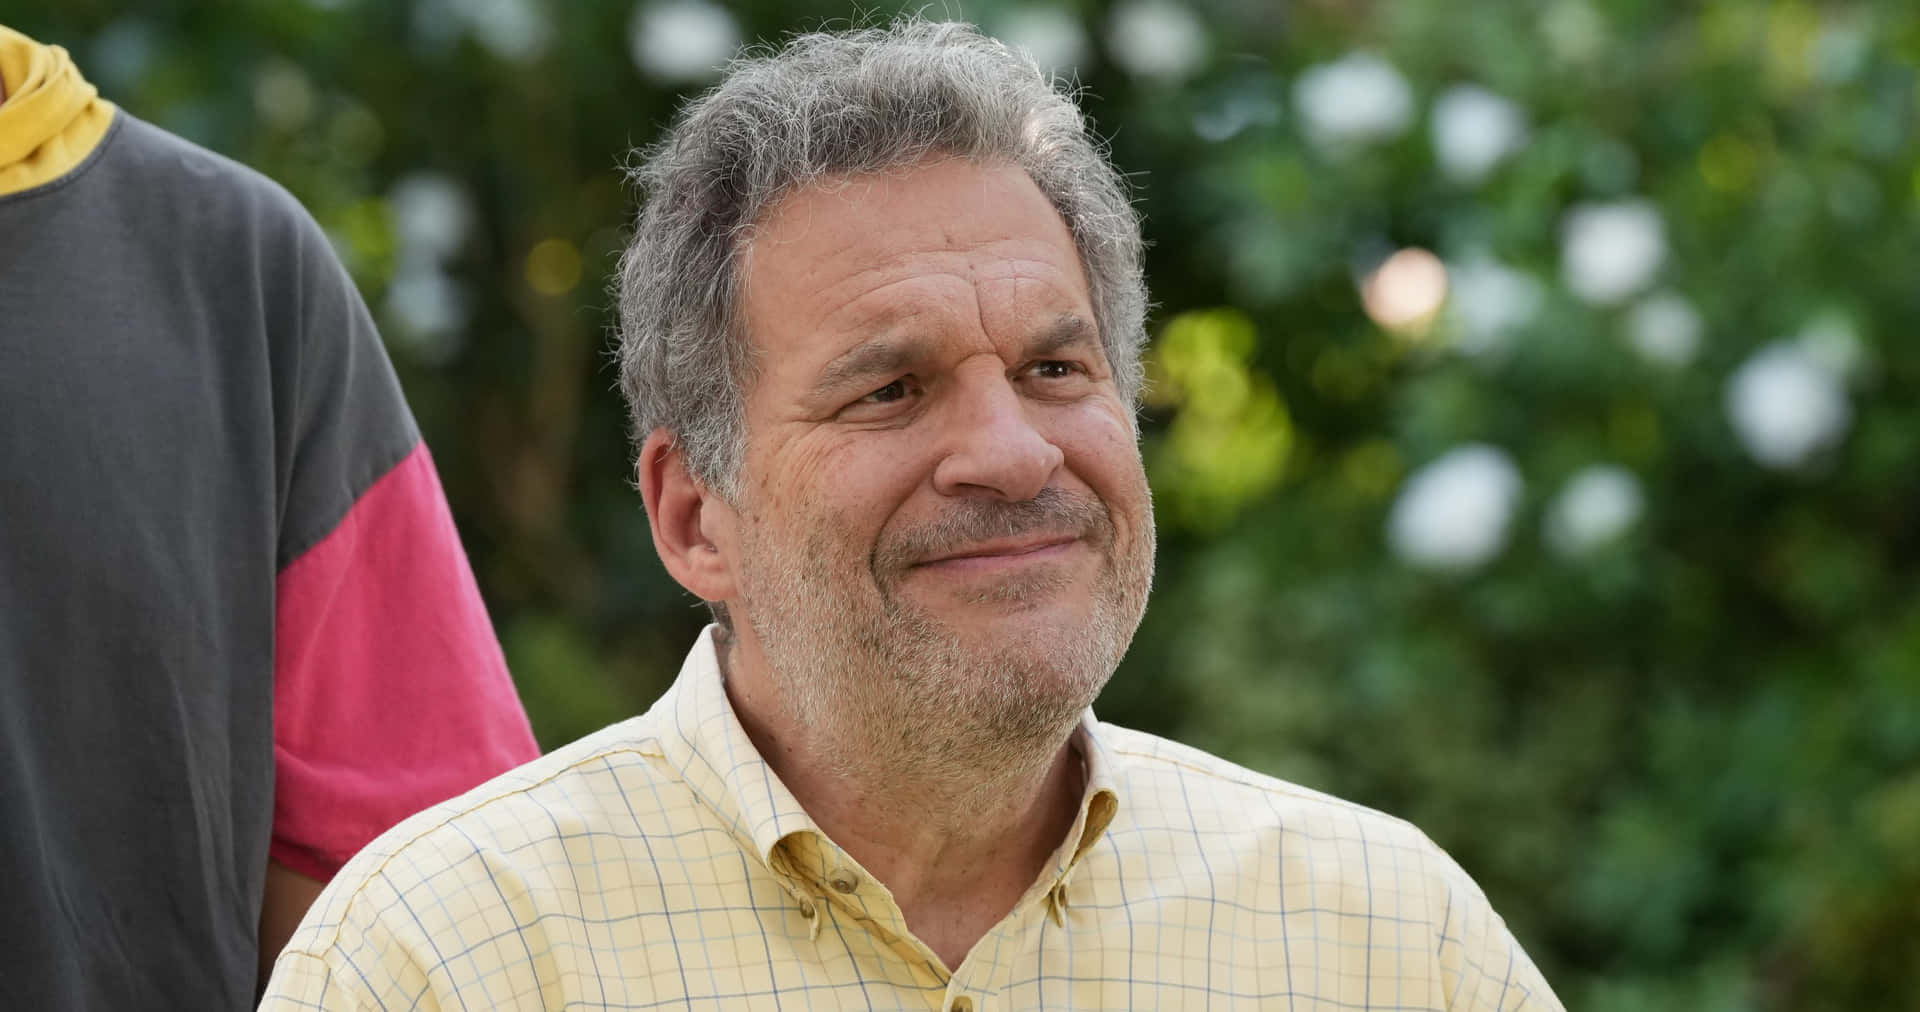 Jeffgarlin Is An American Actor, Comedian, And Director. He Is Best Known For His Role As Jeff Greene On The Hbo Sitcom 